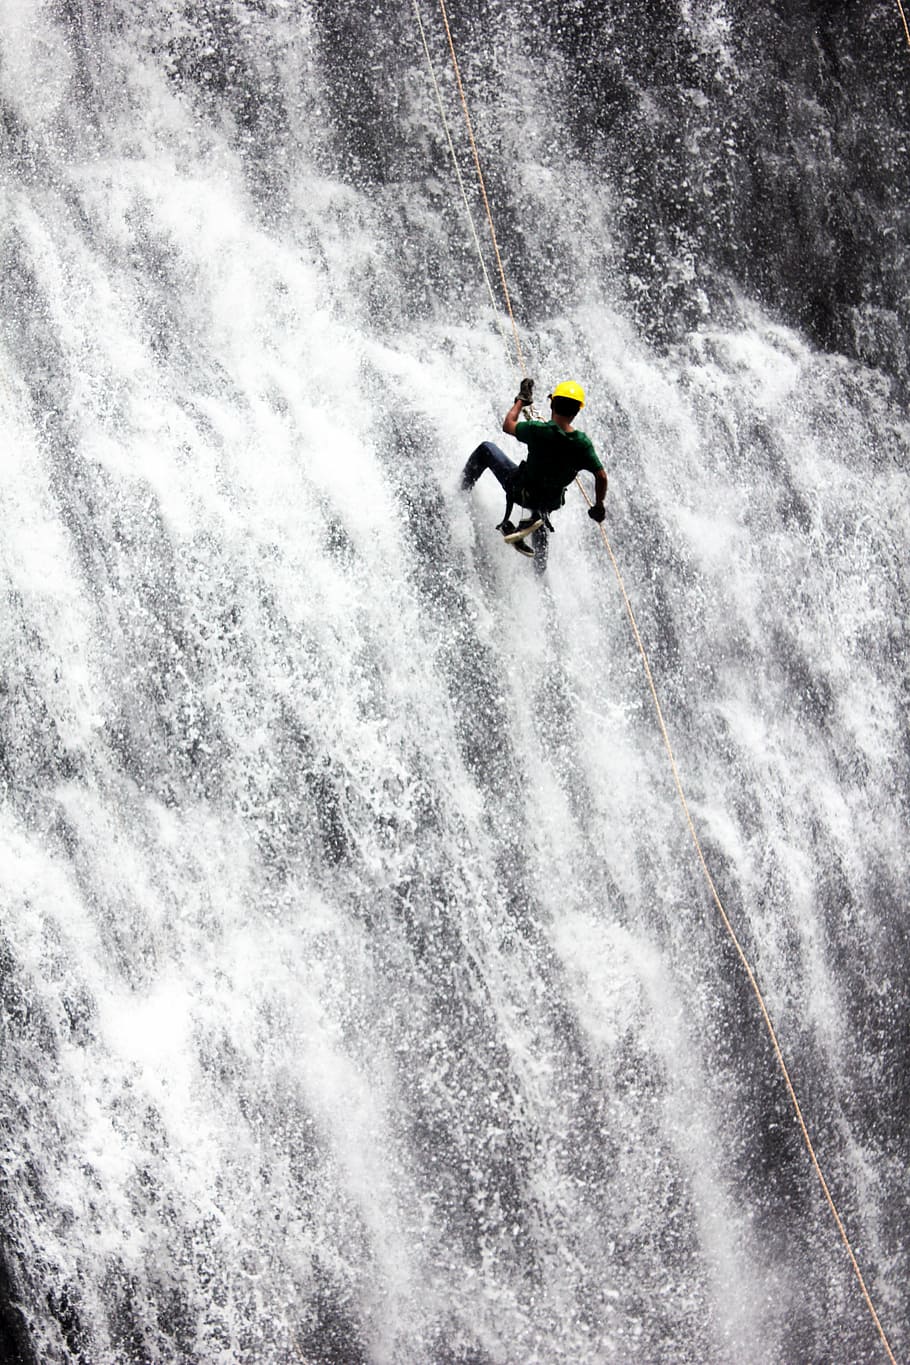 man, climbing, waterfalls, rappelling, waterfall, adventure, rope, sports, water, extreme